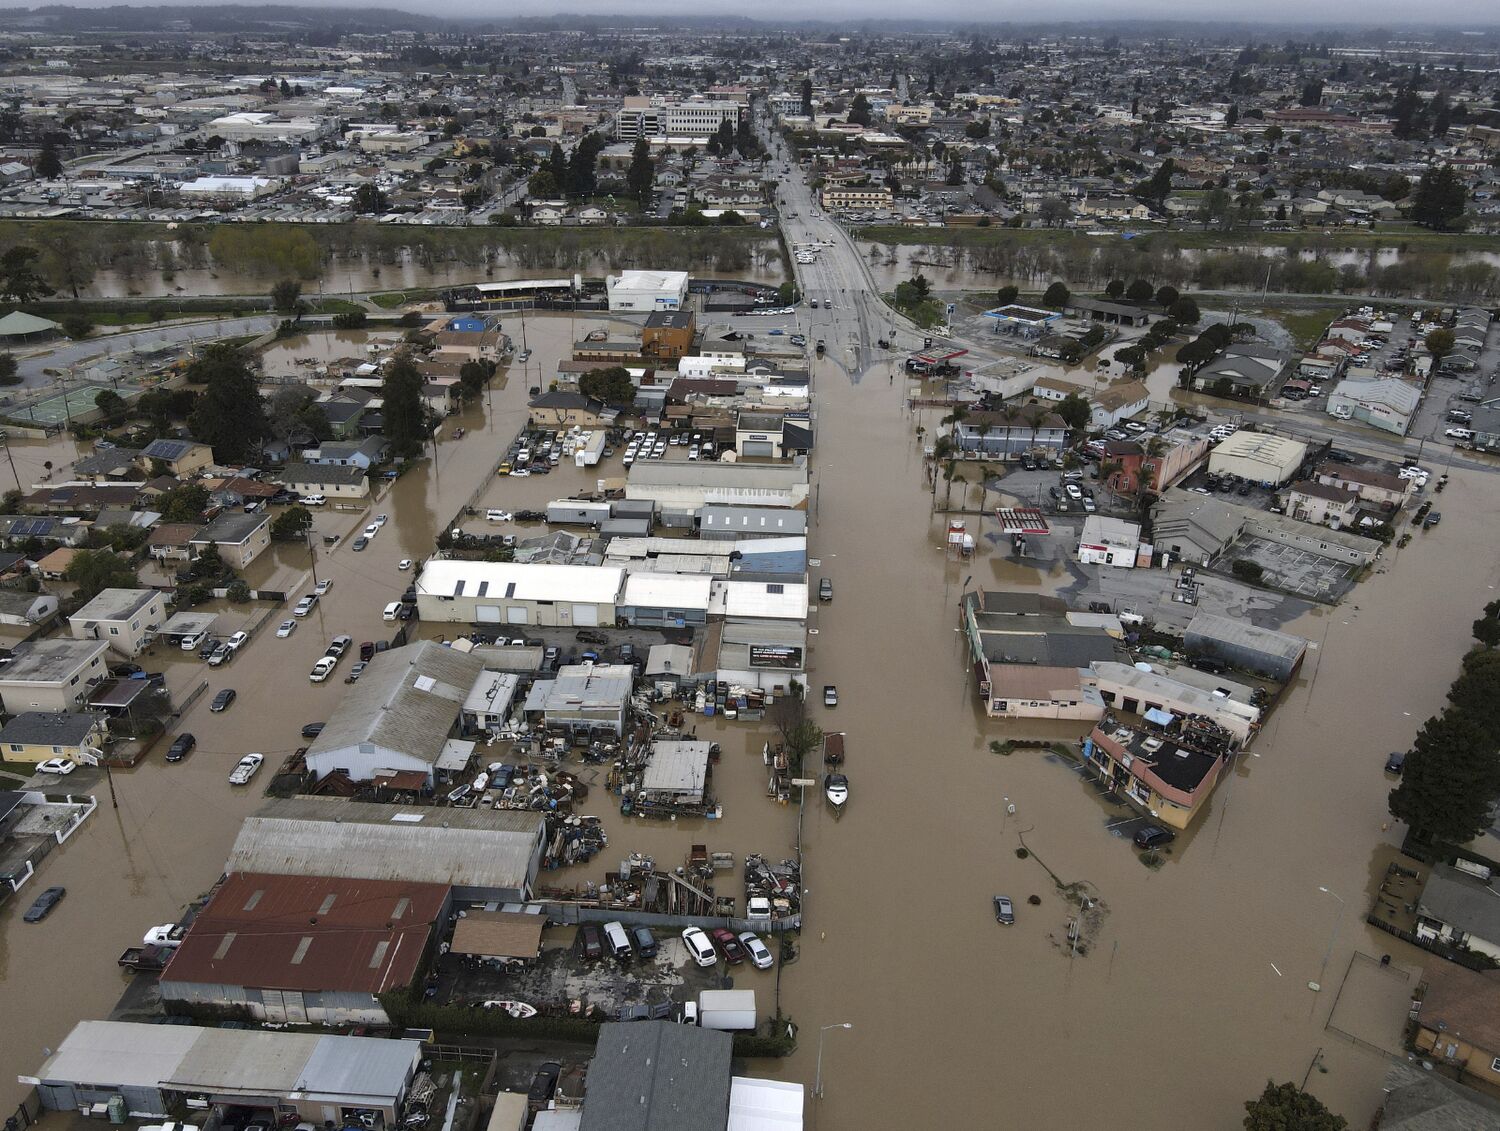 Astonishing before and after satellite photos show California towns swallowed by floods